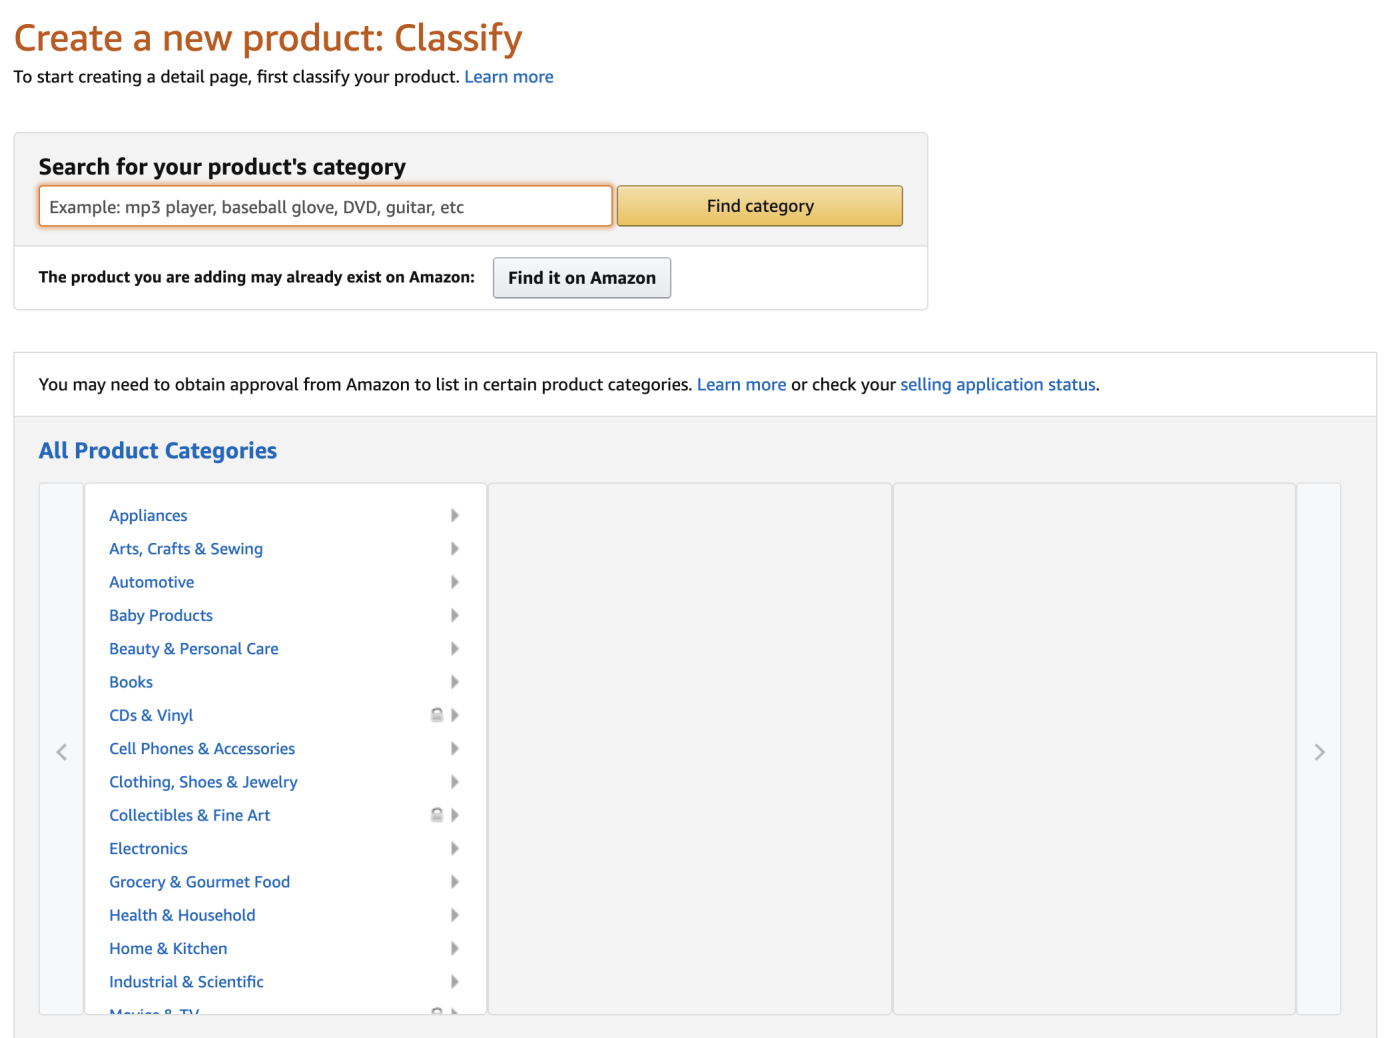 Classifying your item on Amazon Seller Central